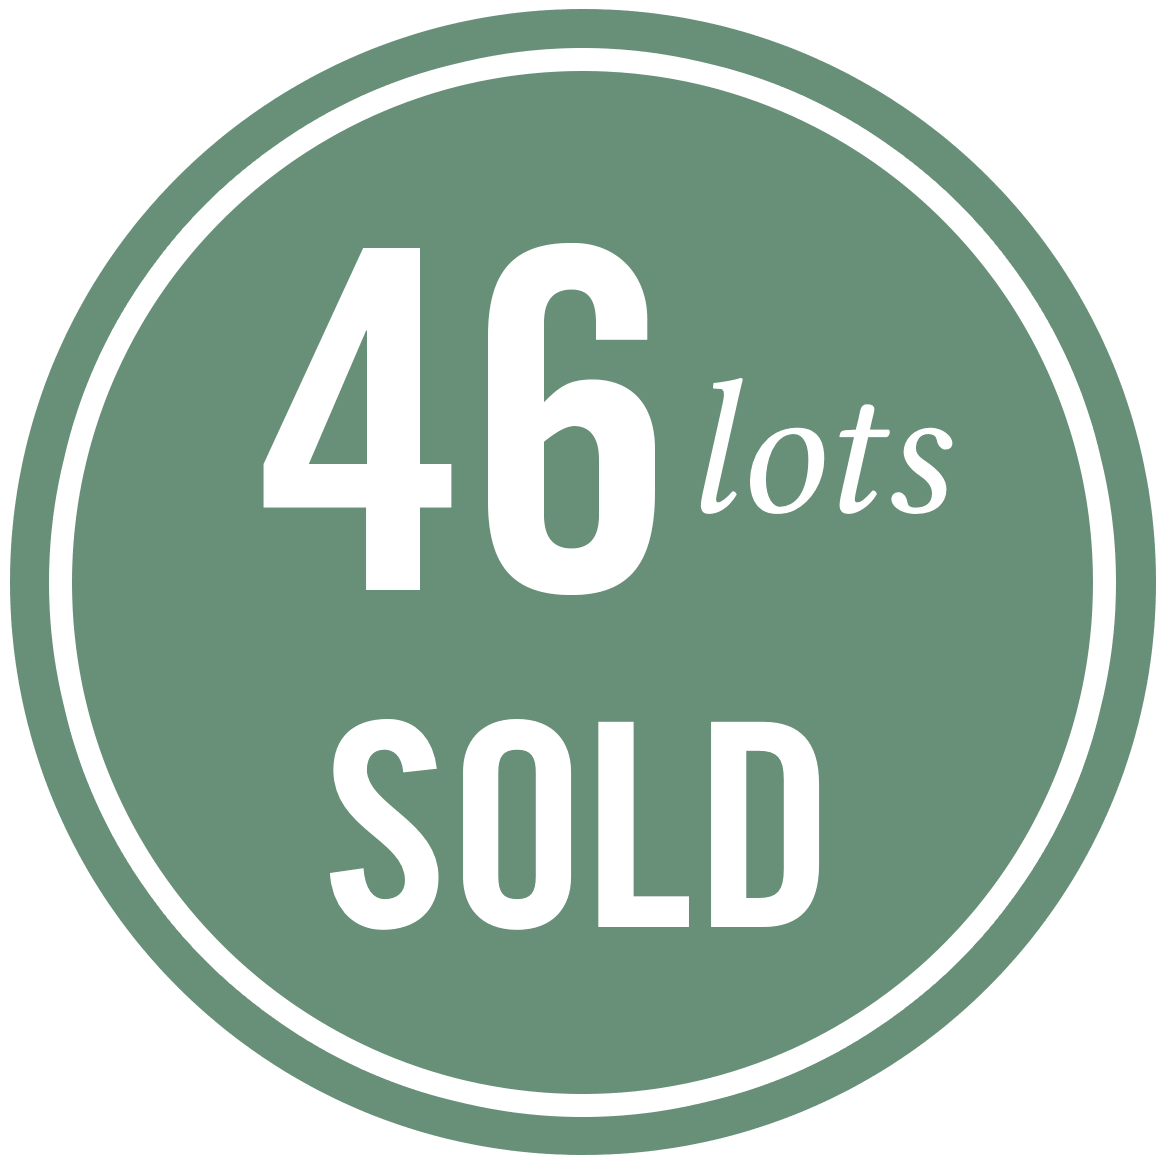 46 Lots Sold